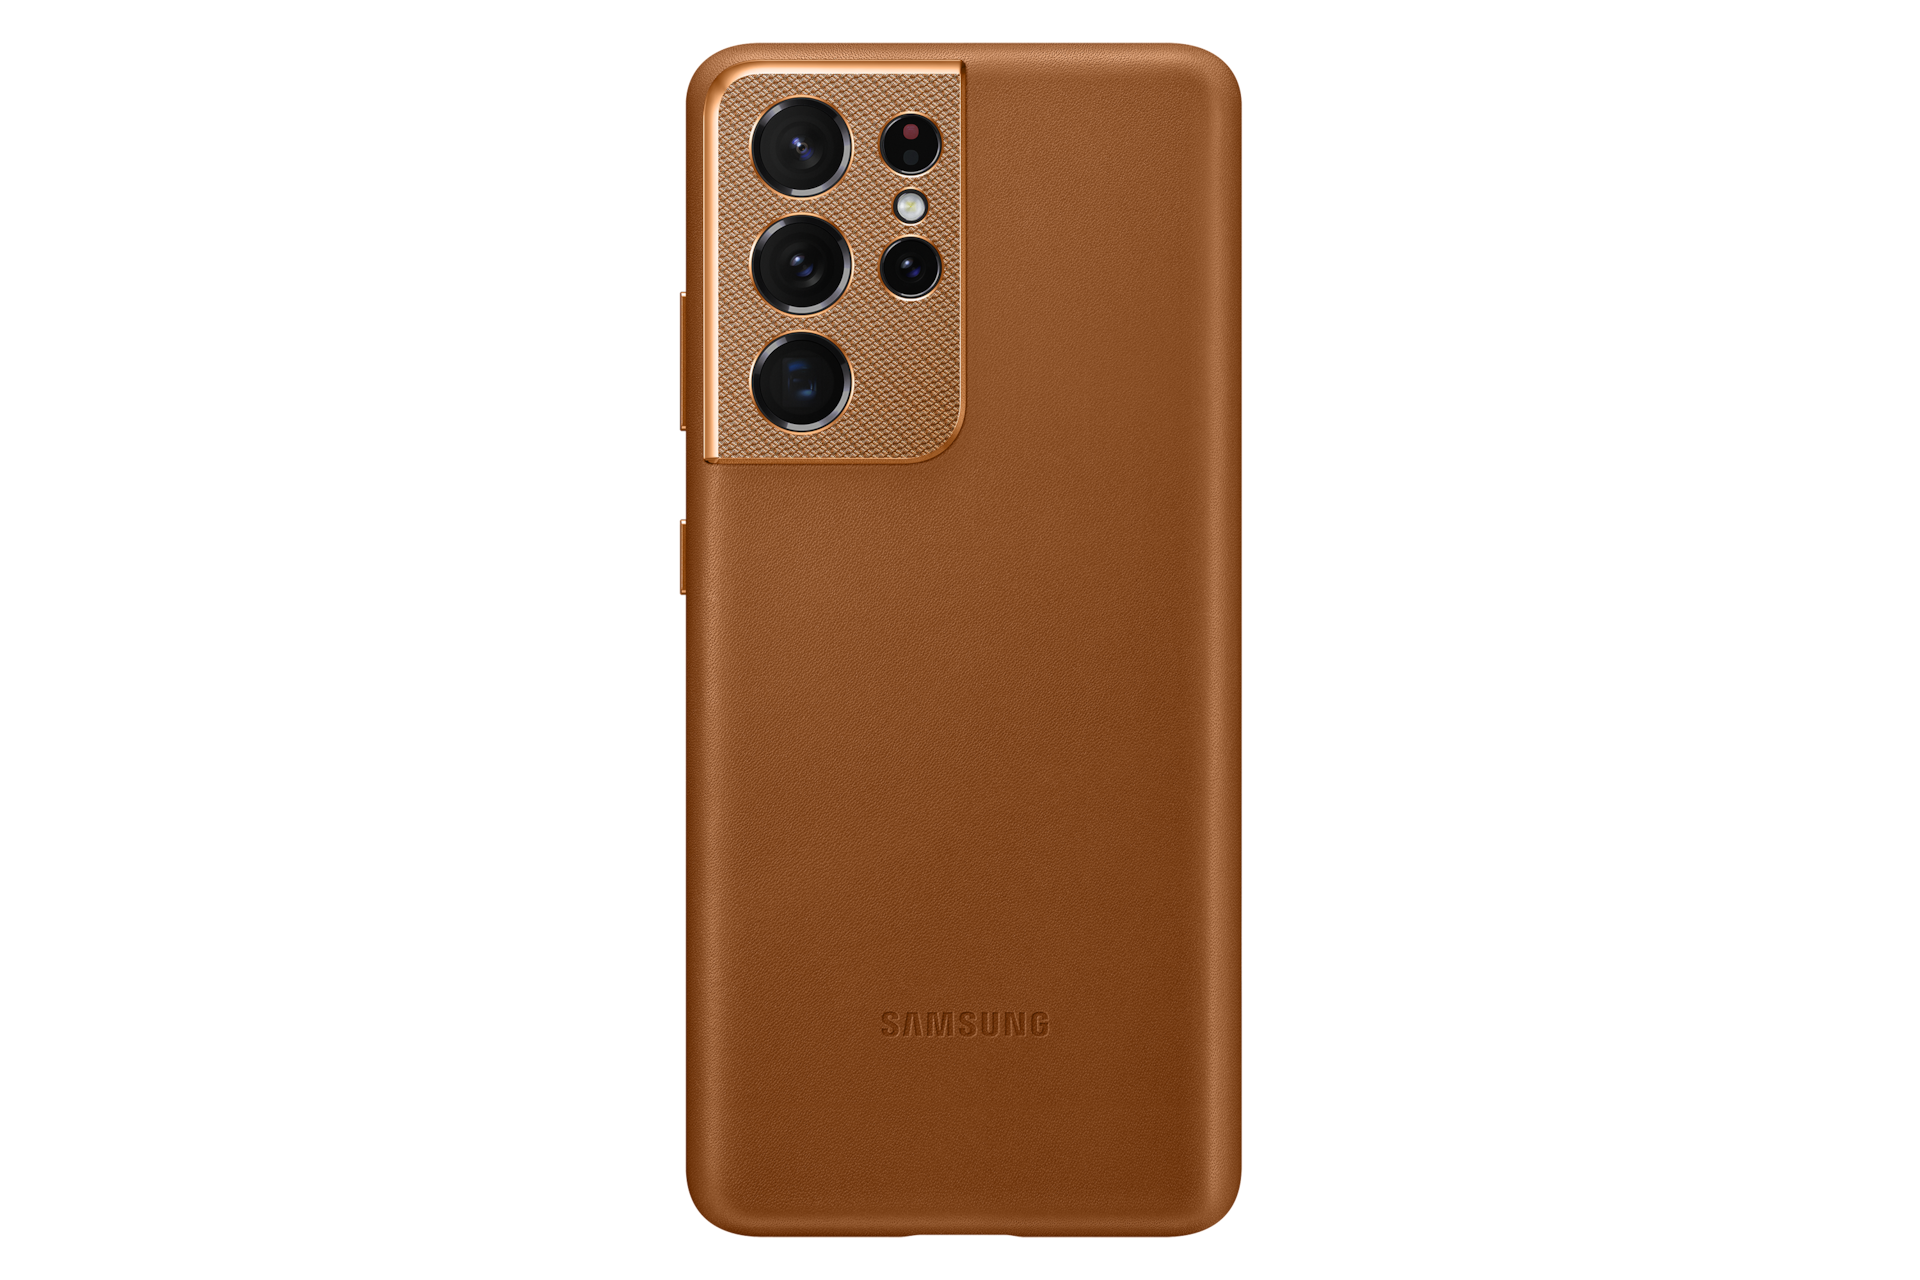 The front of a Galaxy S21 Ultra 5g leather cover has been designed specially to protect the rear camera on your Galaxy S21 Ultra 5G